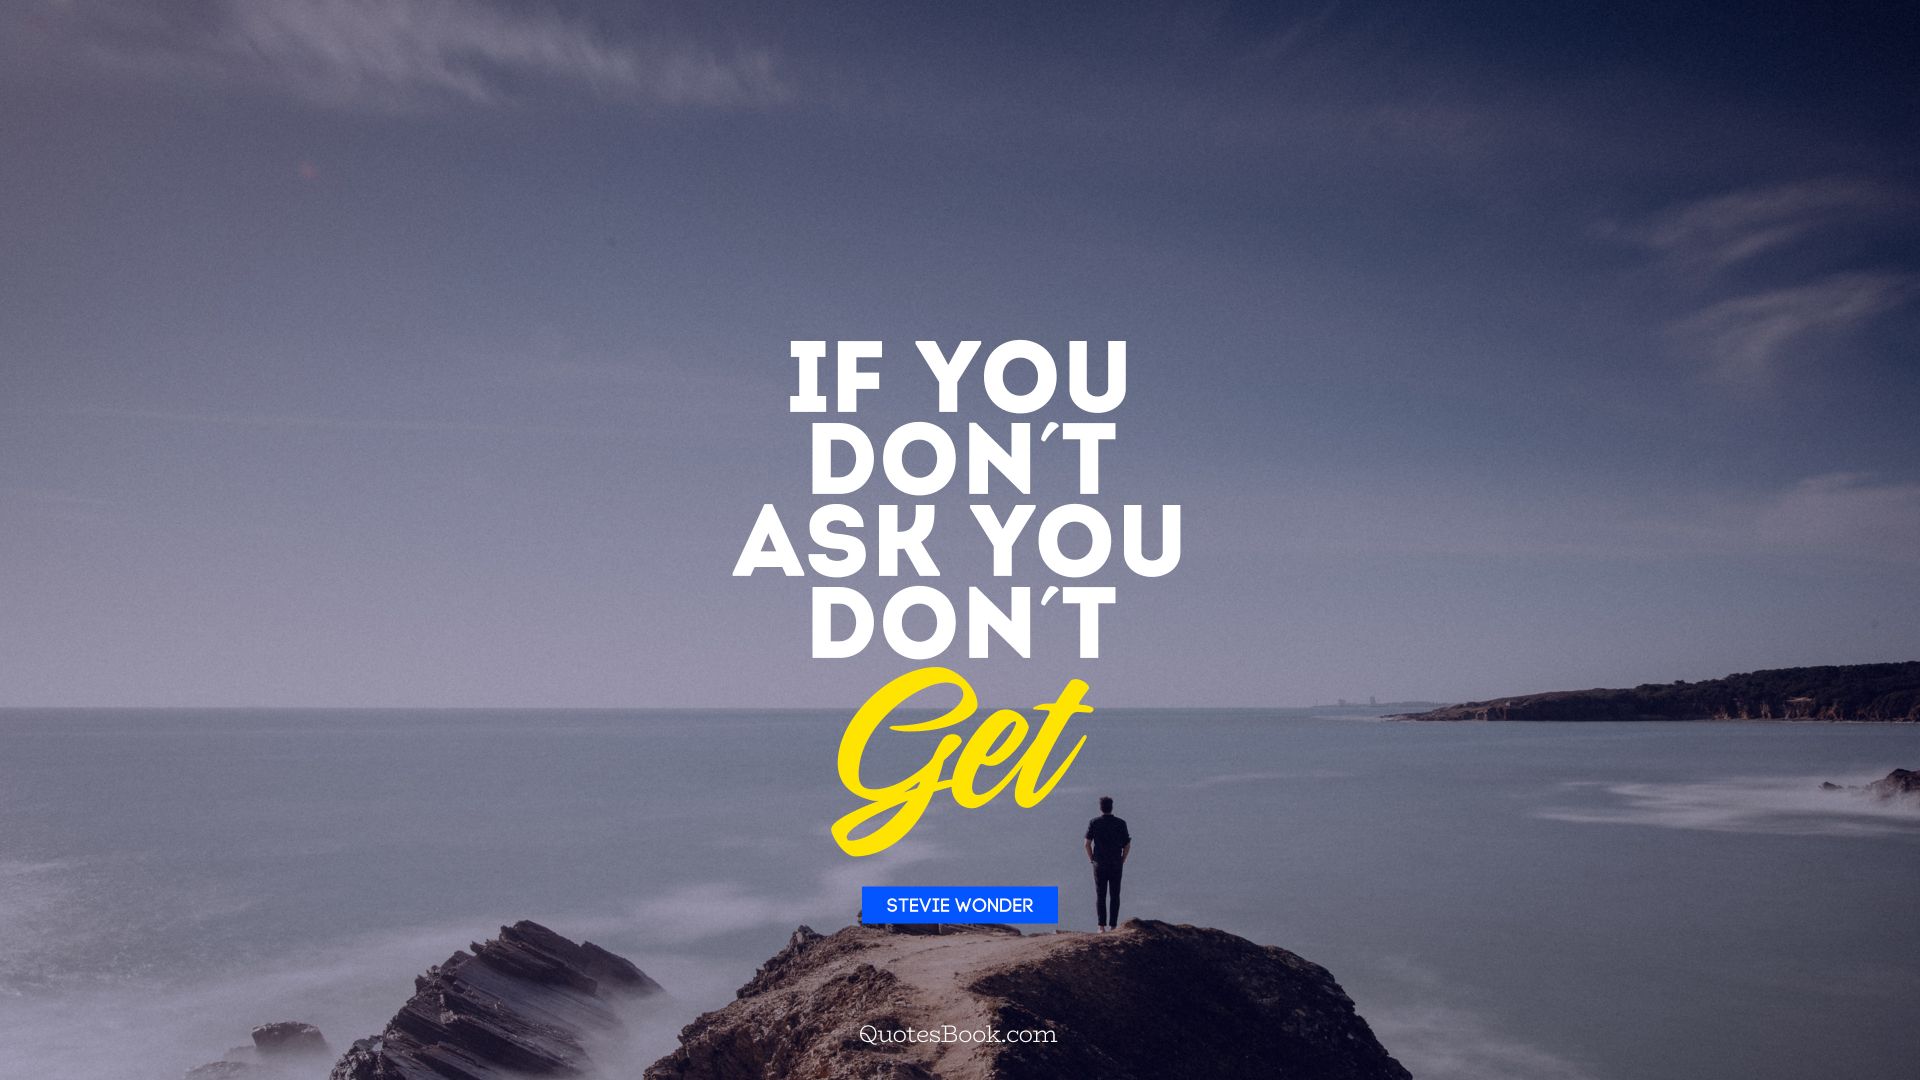 If you don't ask you don't Get. - Quote by Stevie Wonder